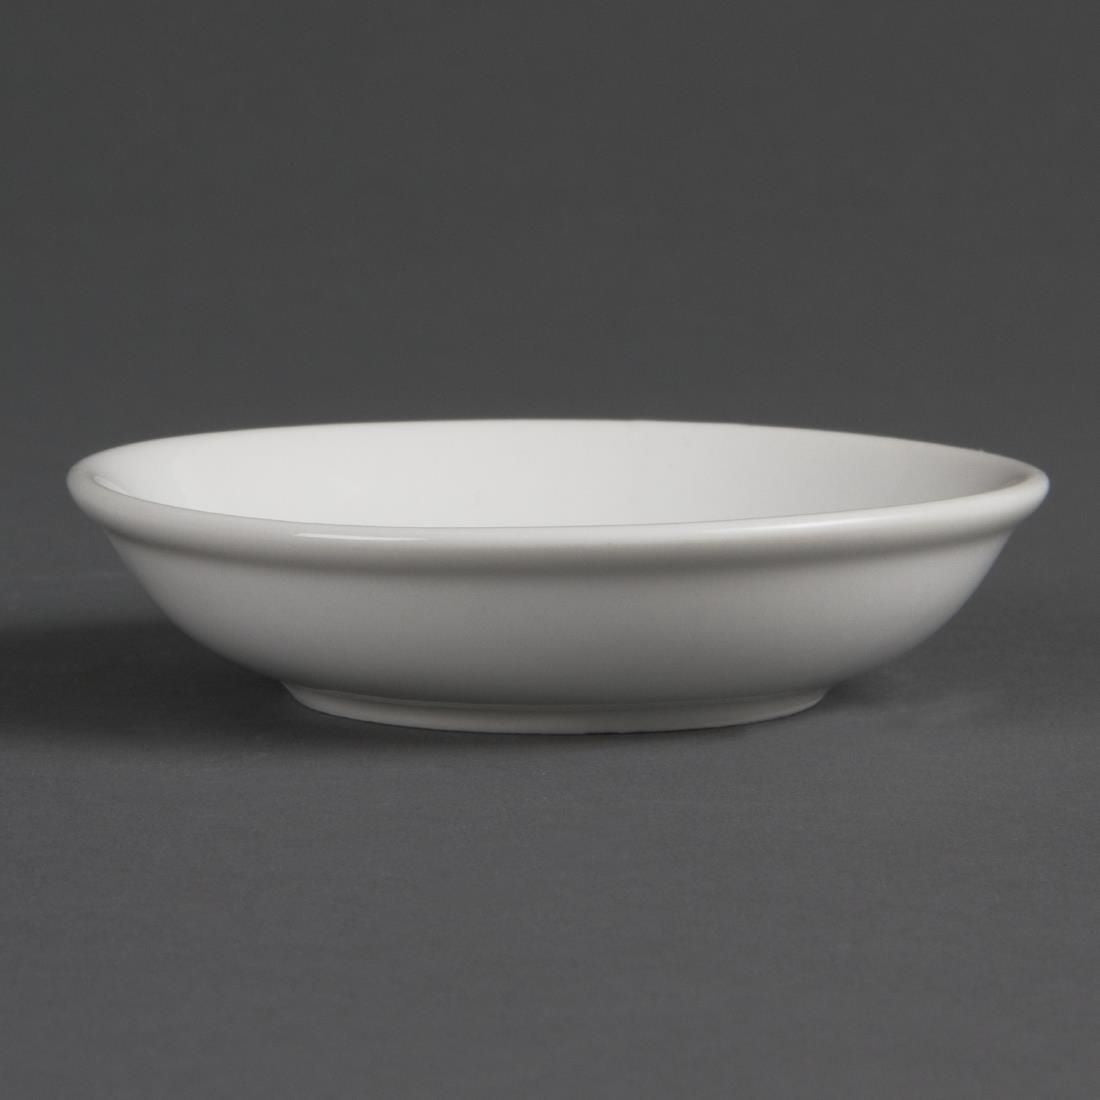 CB494 Olympia Whiteware Soy Dishes 100mm (Pack of 12)